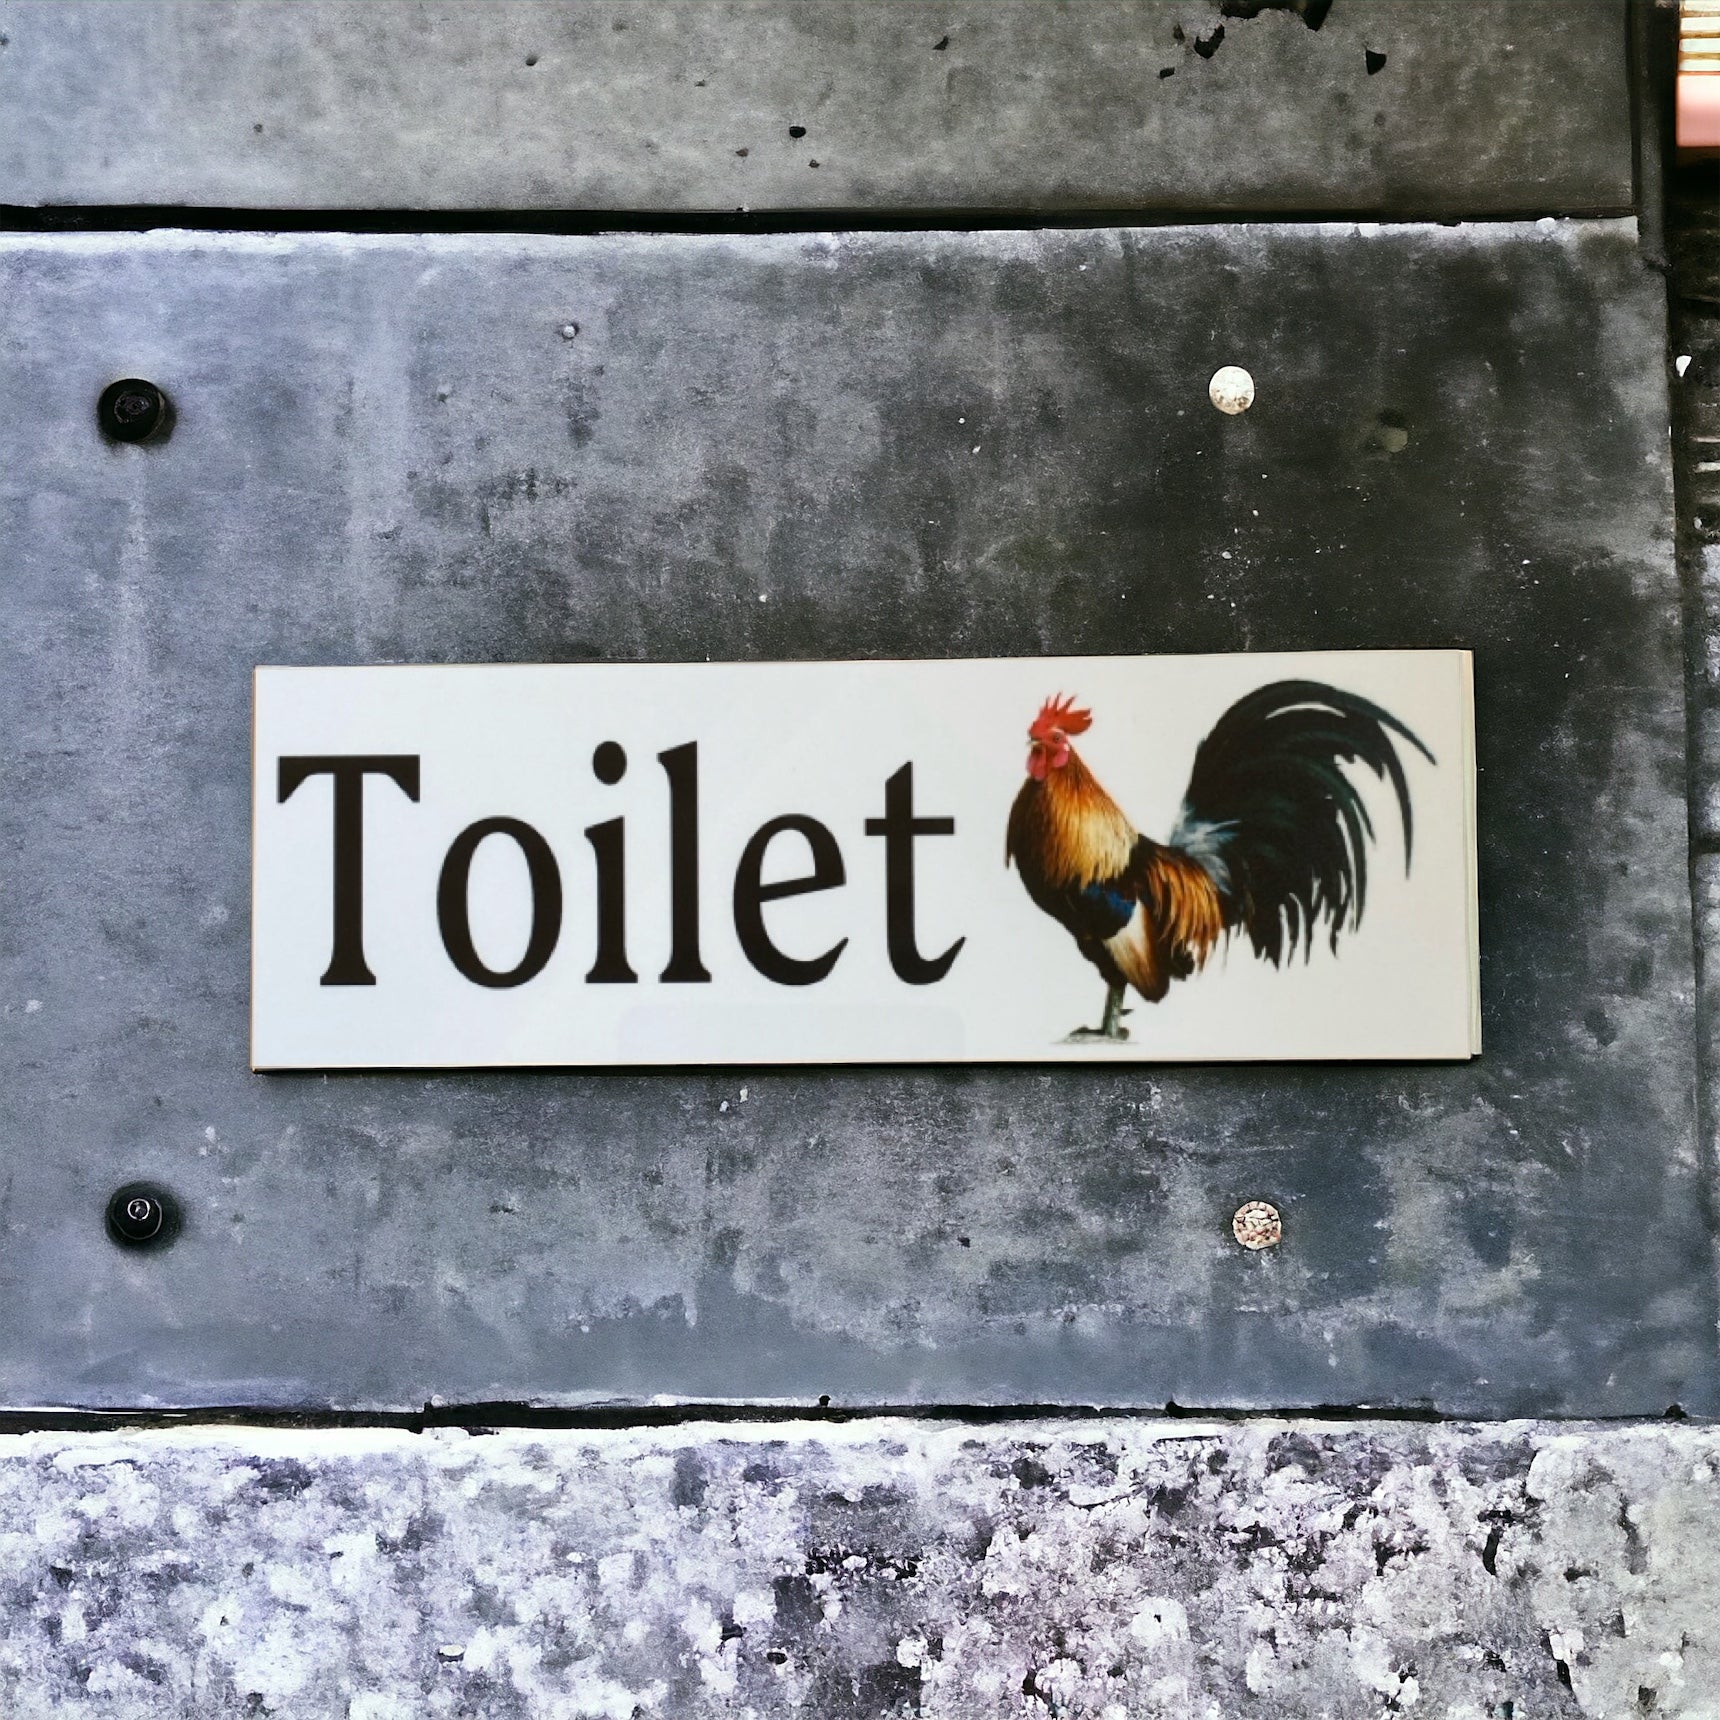 Rooster Toilet Laundry Bathroom Sign - The Renmy Store Homewares & Gifts 